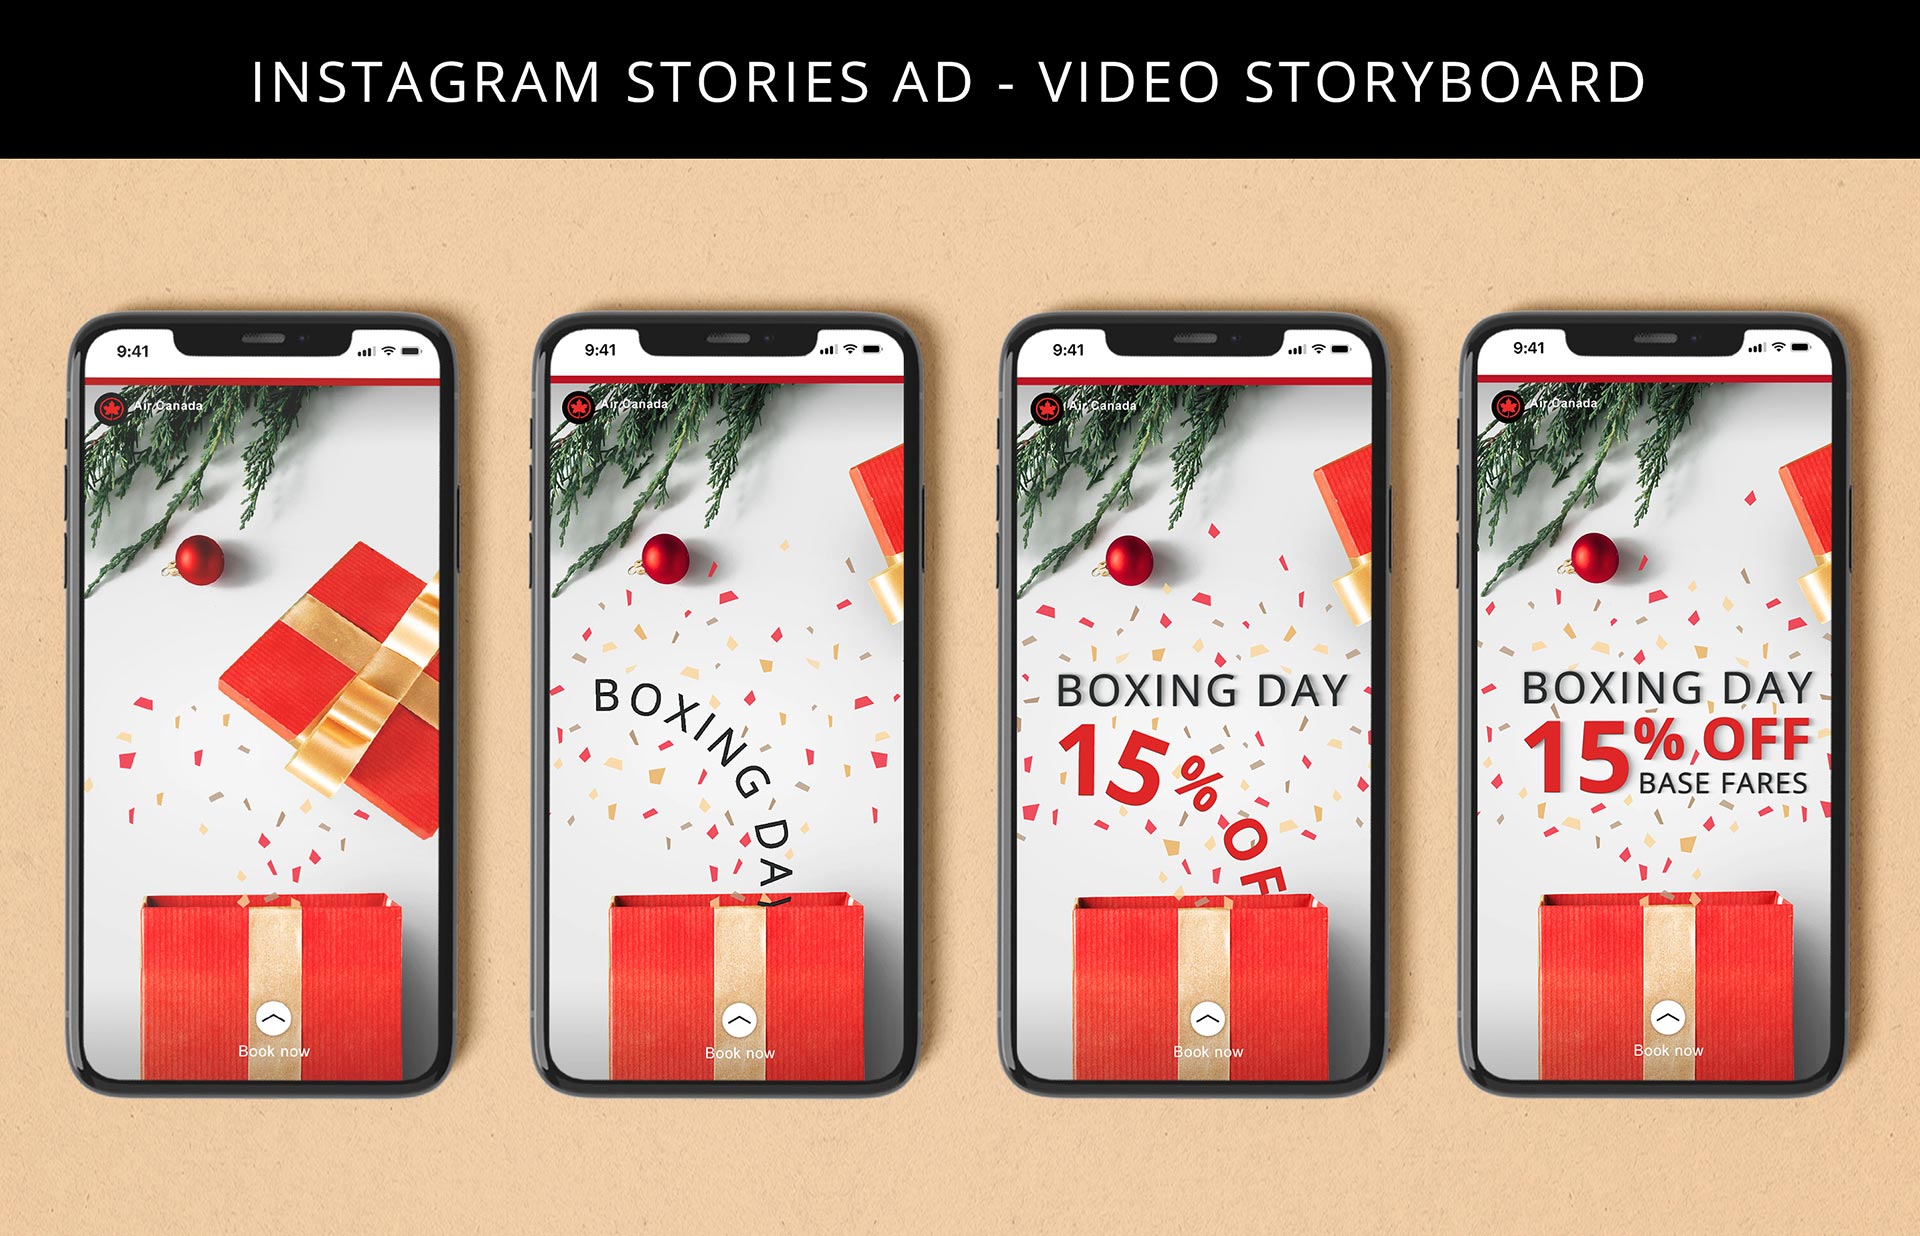 Air Canada - Boxing Day campaign - Instagram Stories storyboard